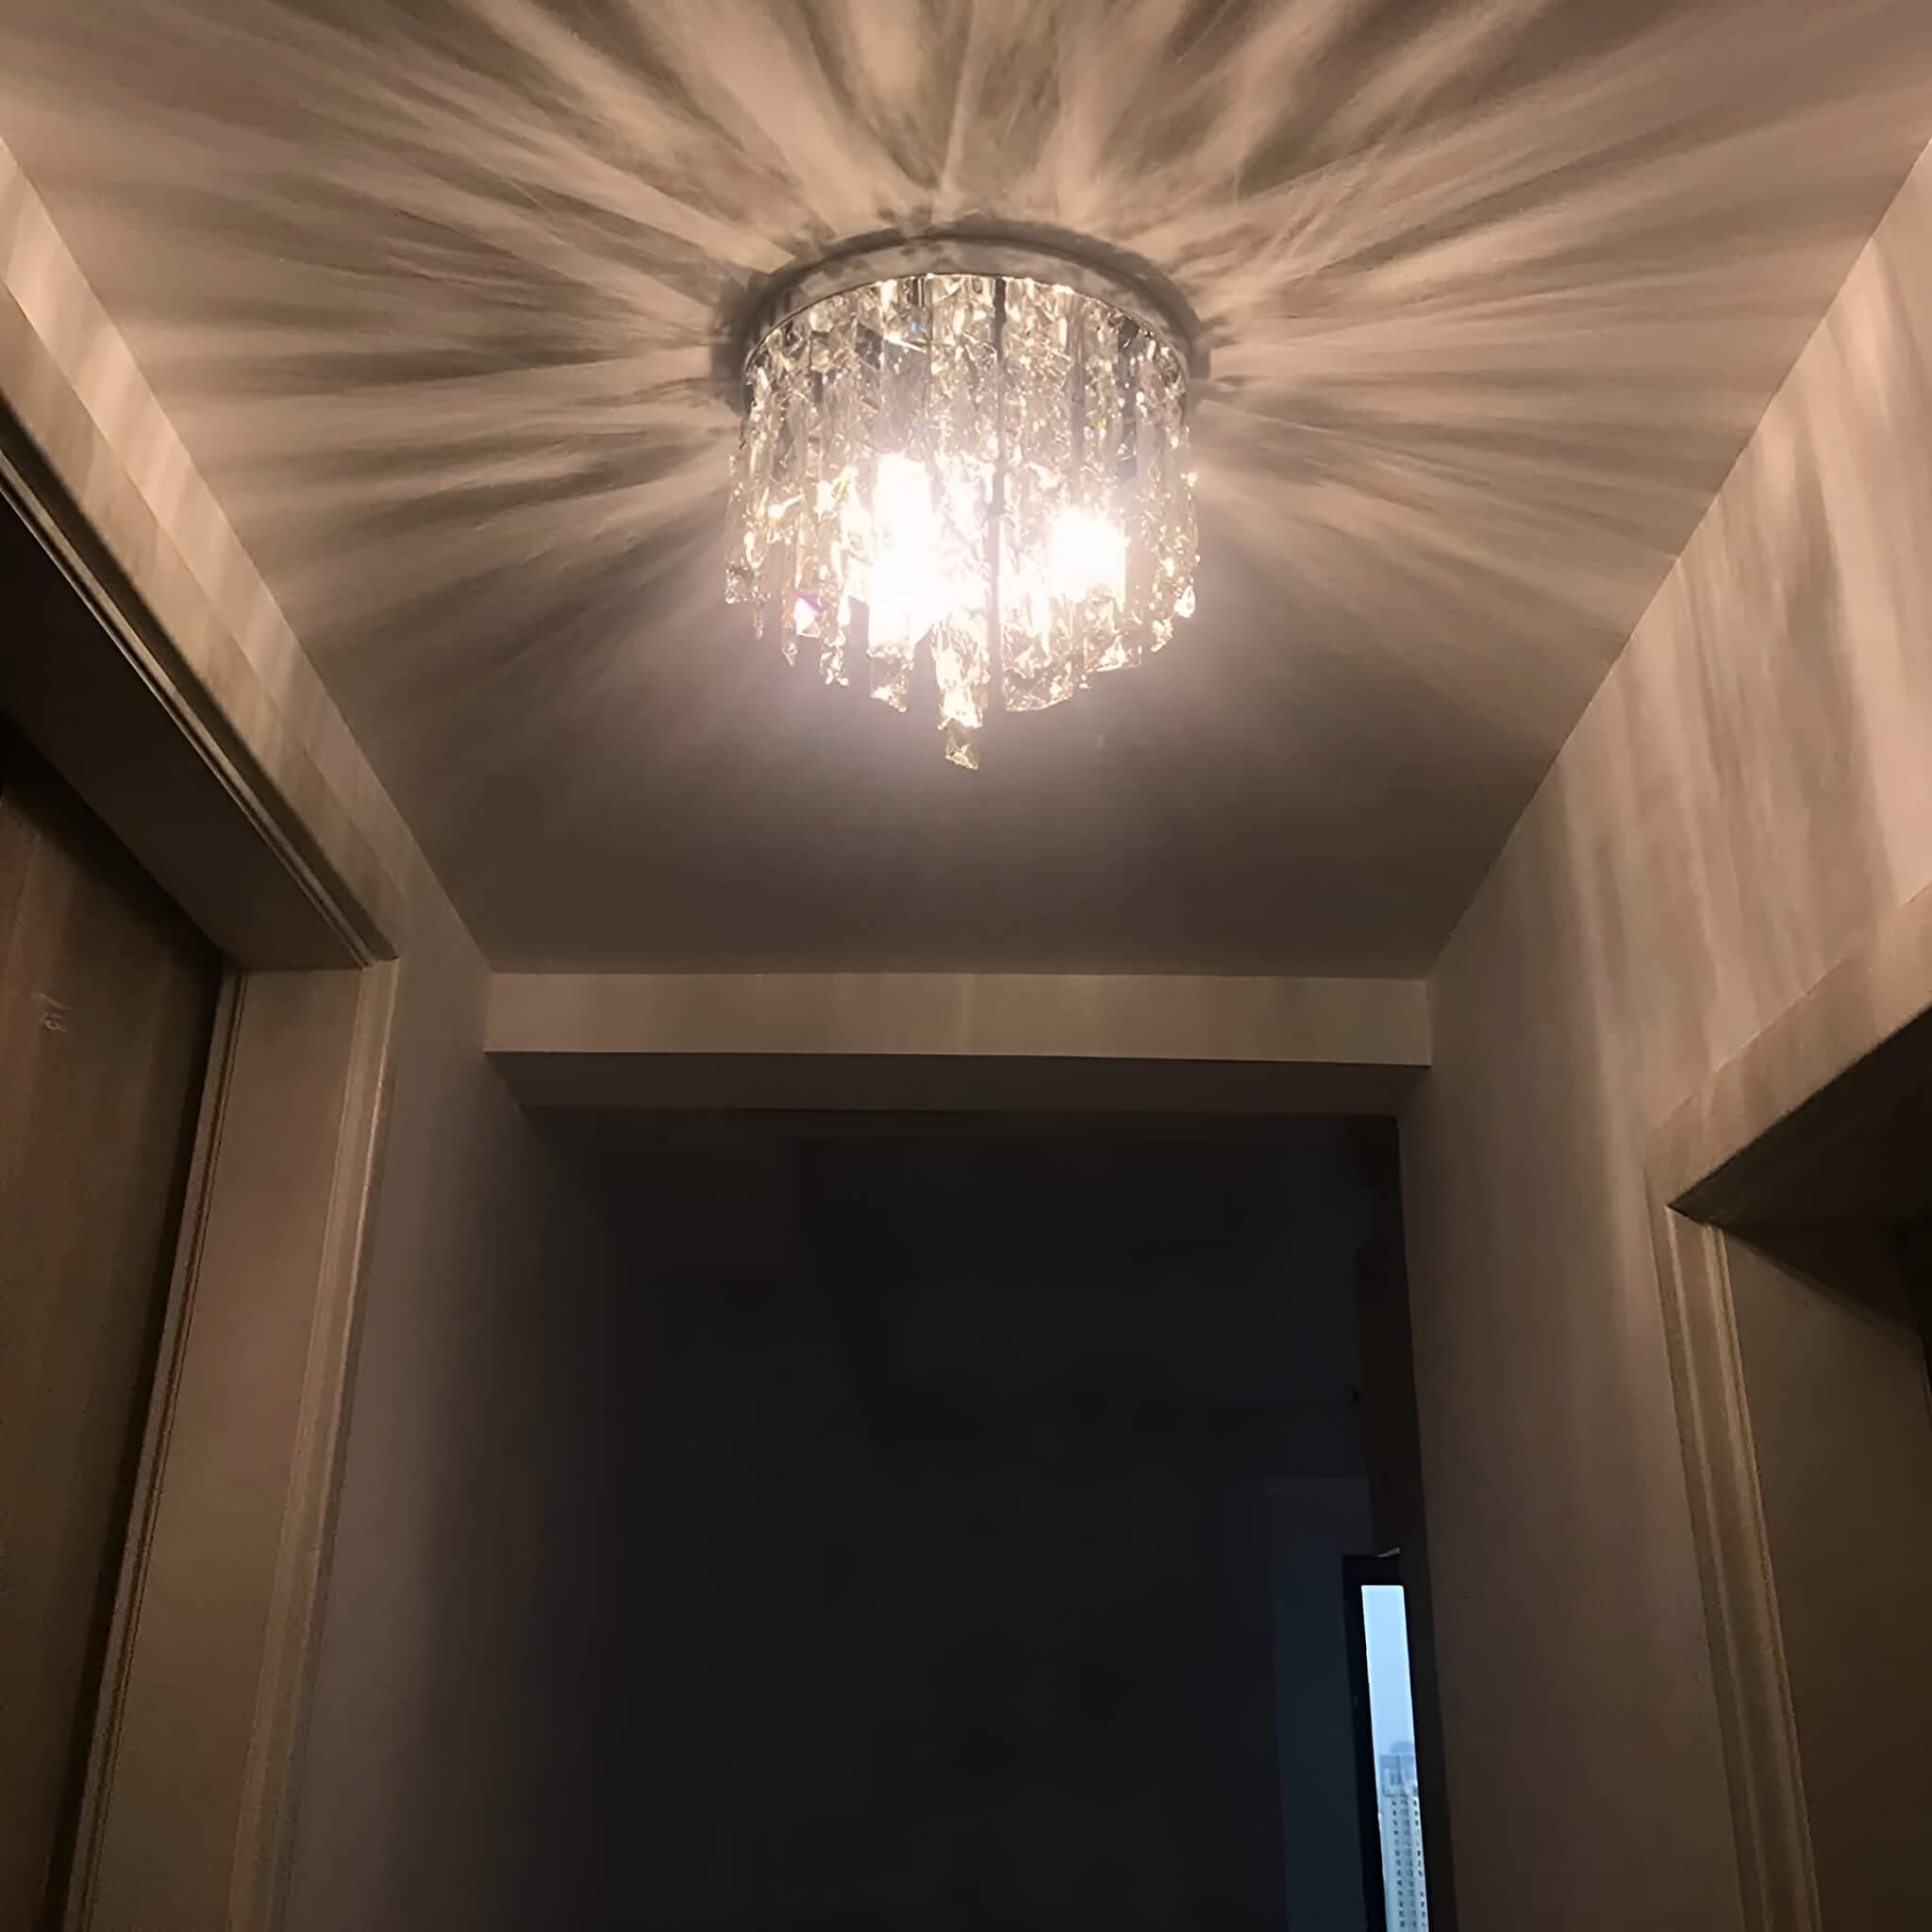 Contemporary Round Crystal Chandelier - Flush Mount Ceiling Lights doorway |Sofary